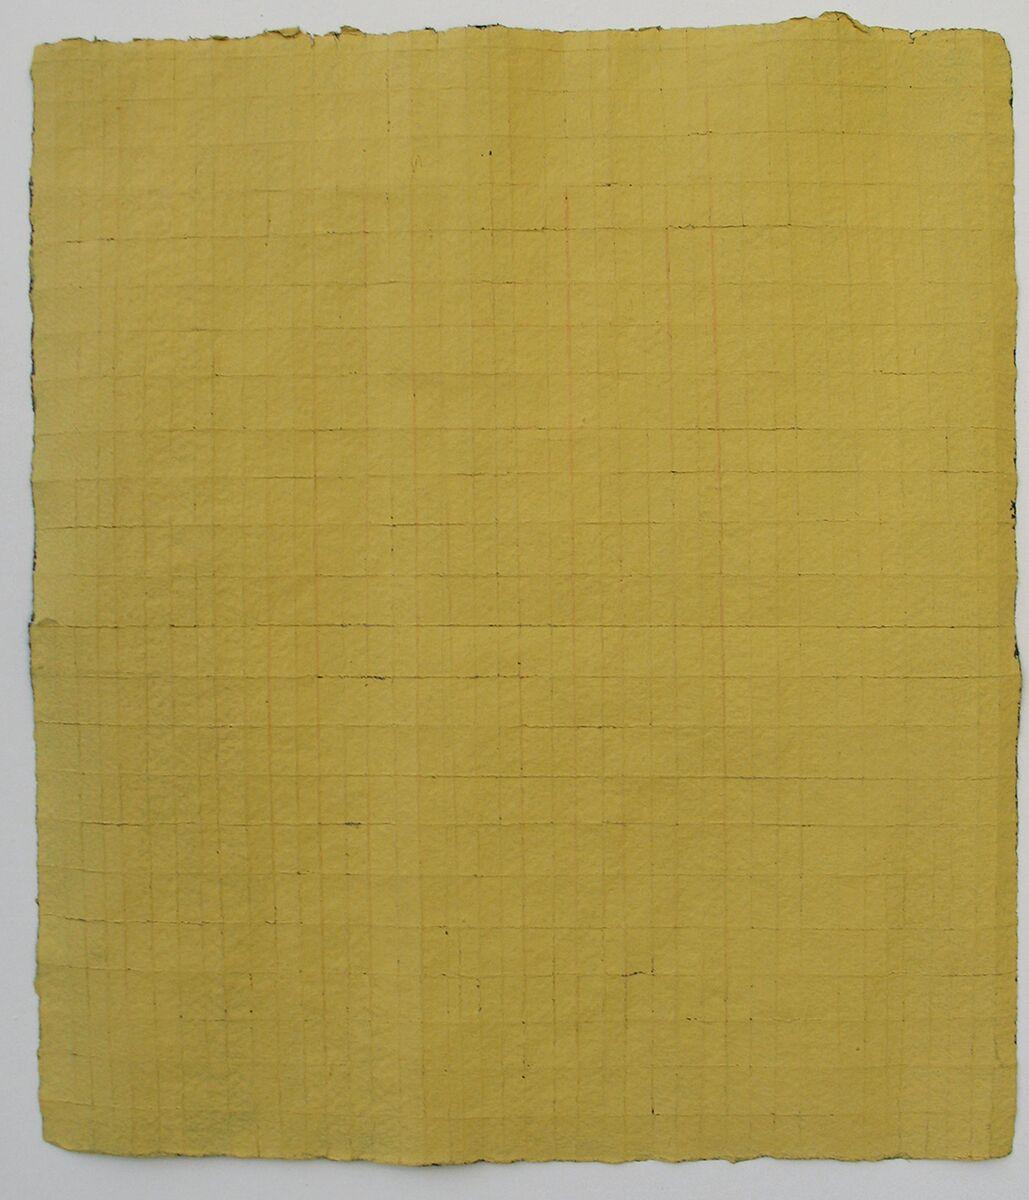 Jean Wolff Abstract Painting - Naples Yellow Fold - Original Abstract Minimal Painting - Acrylic on Paper 